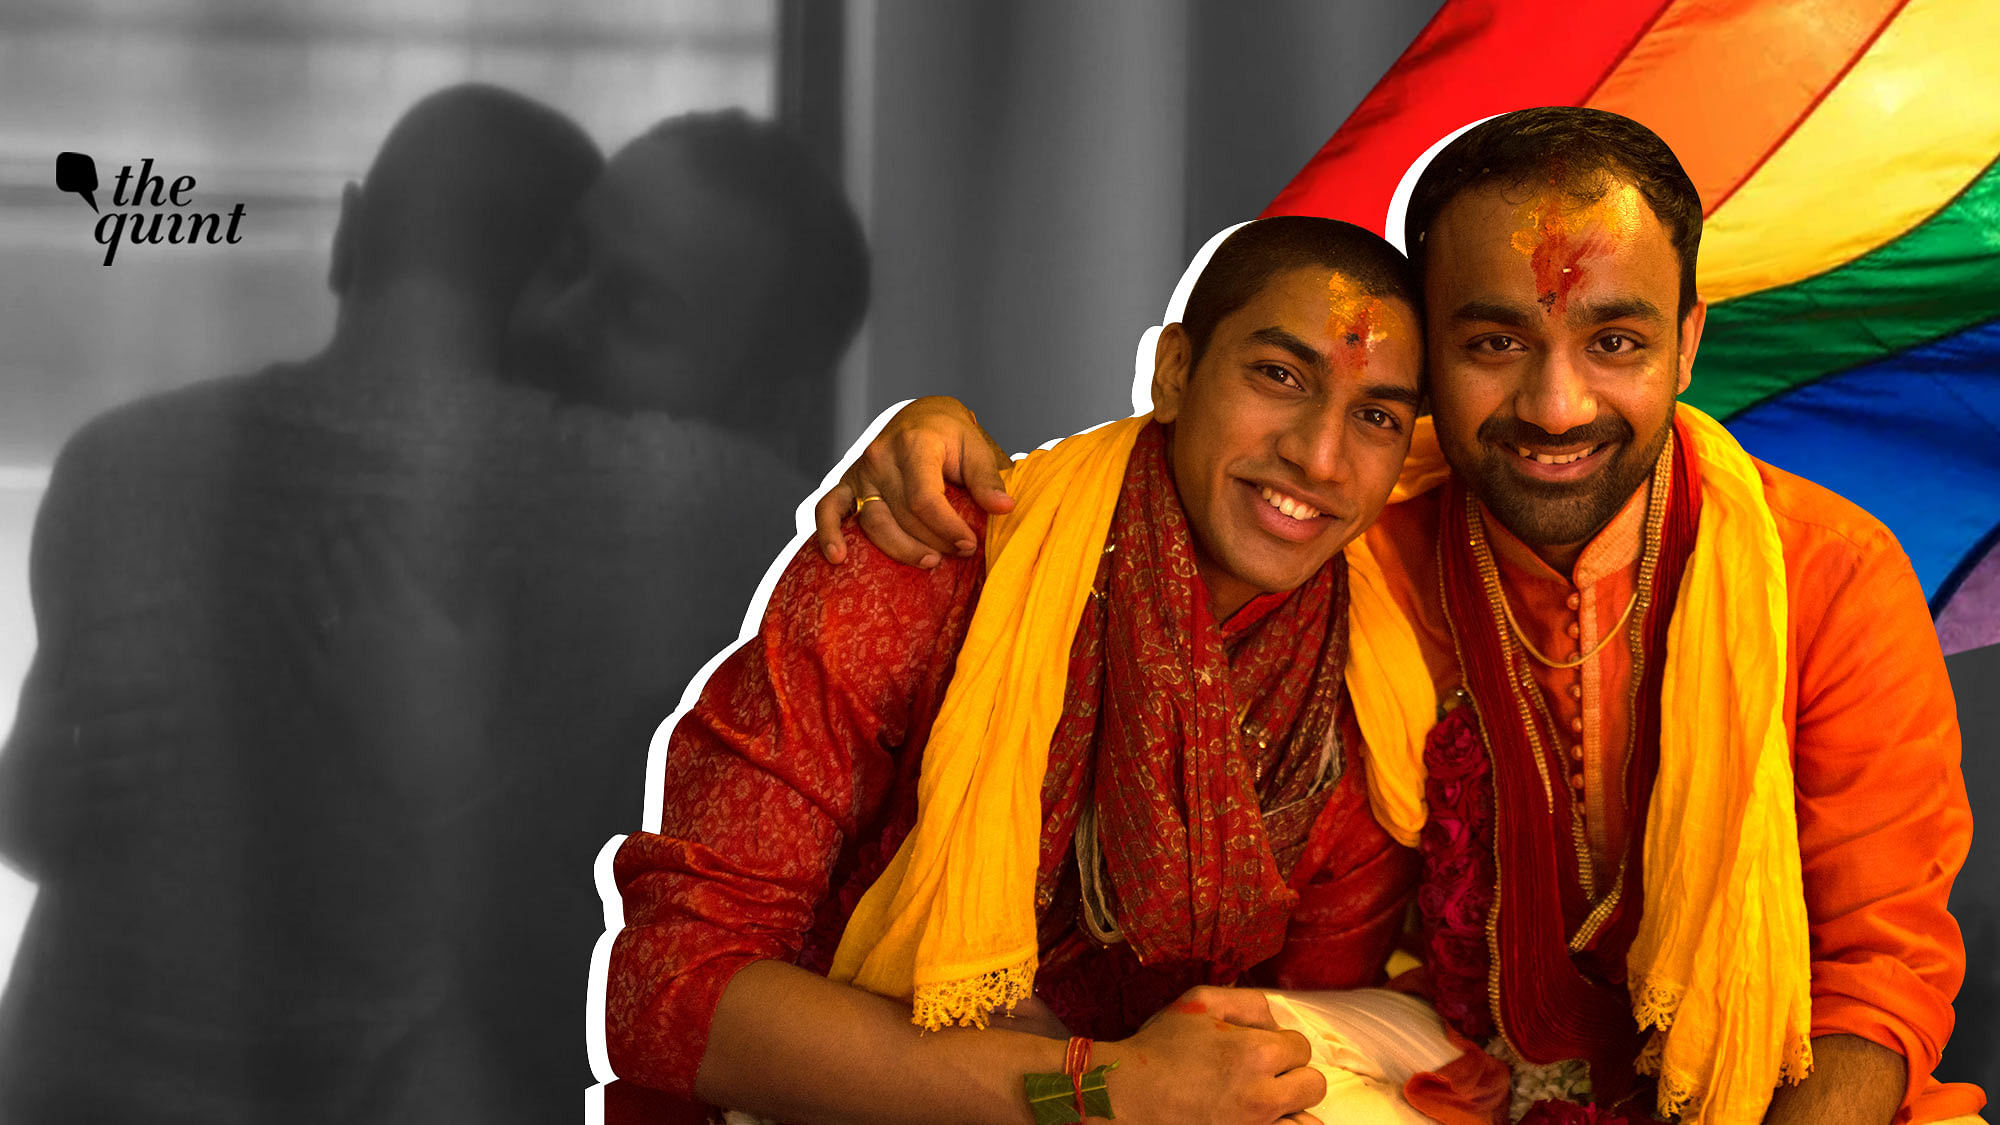 Same-Sex Marriage in India: Vivek and Vishwa got married in 2017 and all they want is to legally be recognised as partners.